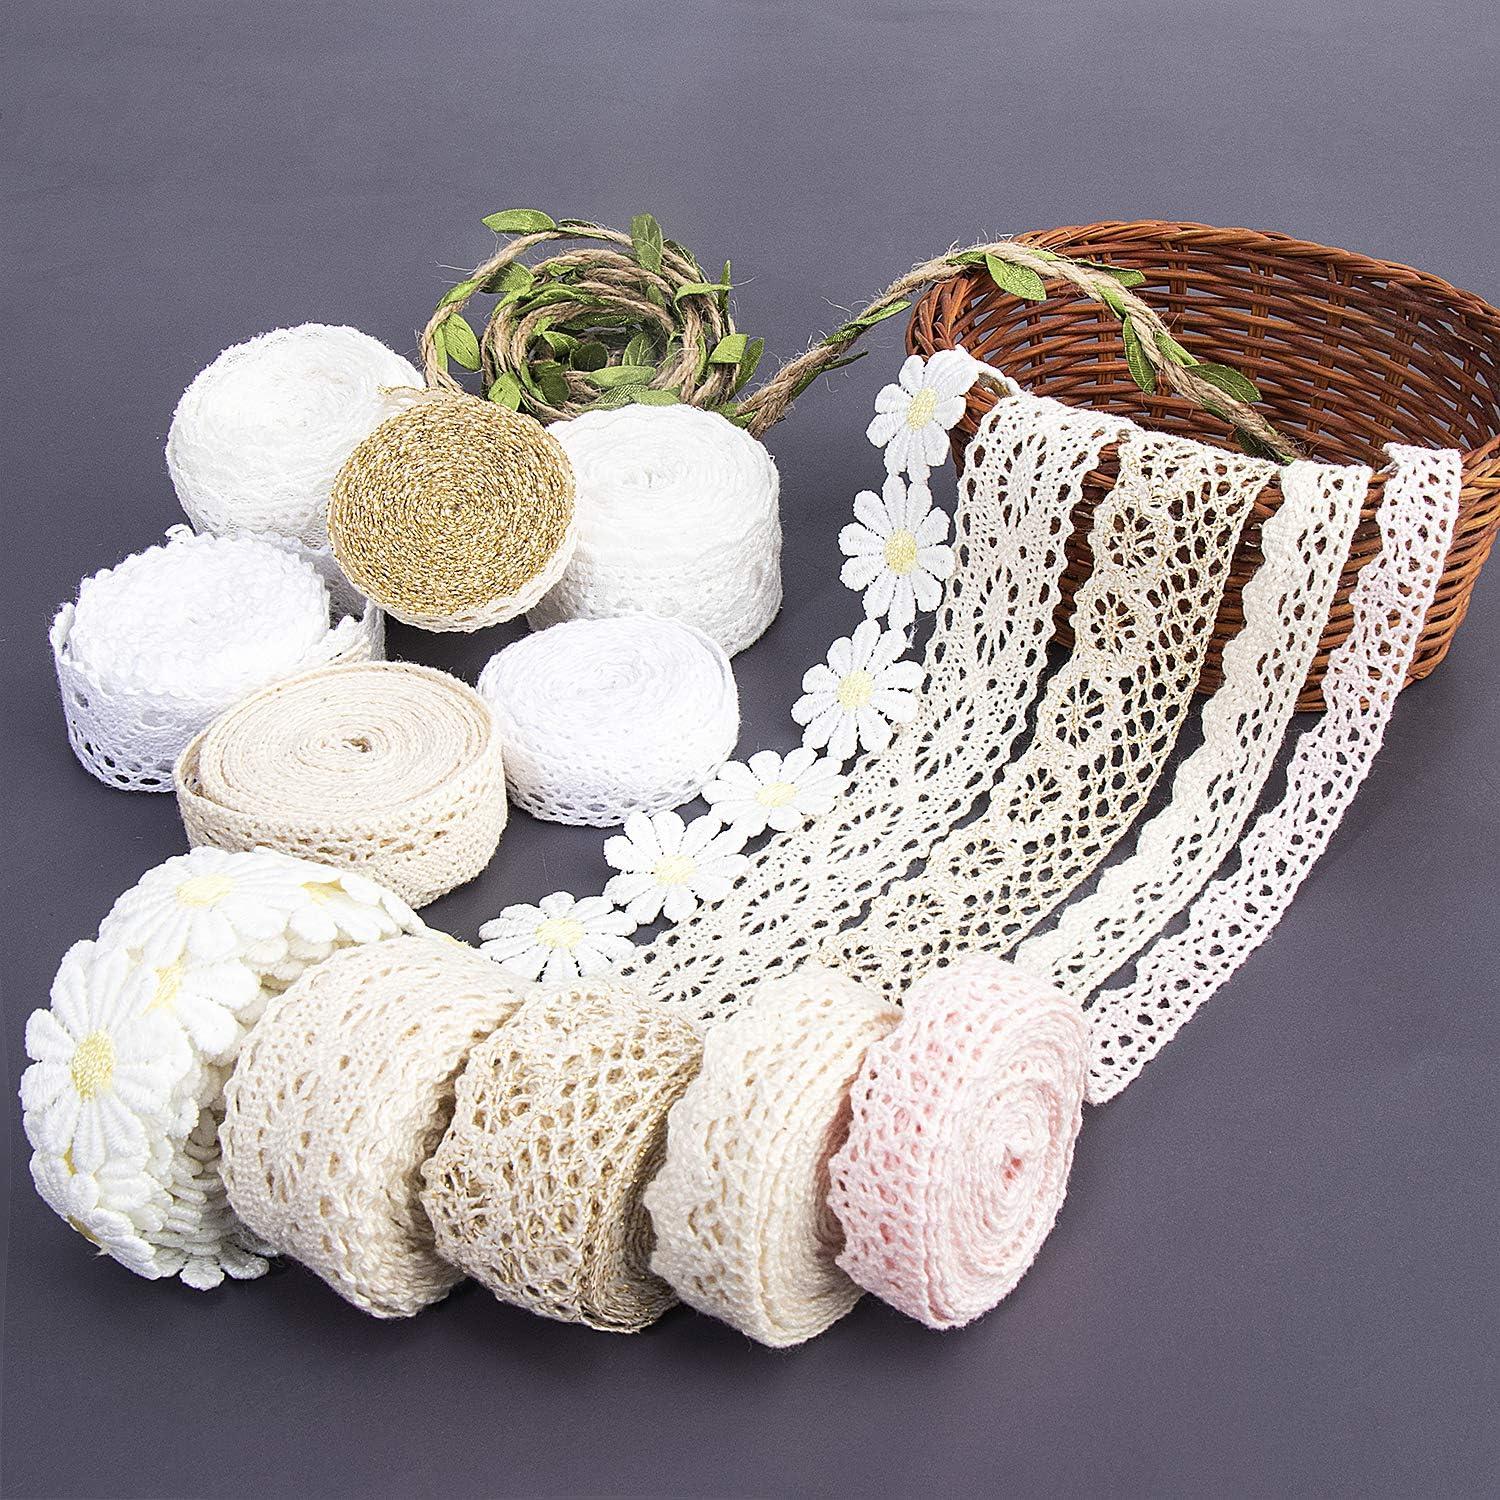 TEHAUX 3pcs Flower Water Soluble Lace Ribbons for Crafts Fabric Sewing Lace  Trim Edging Lace Trim Flower Trim Ribbon Wedding Decor Ribbon for Crochet